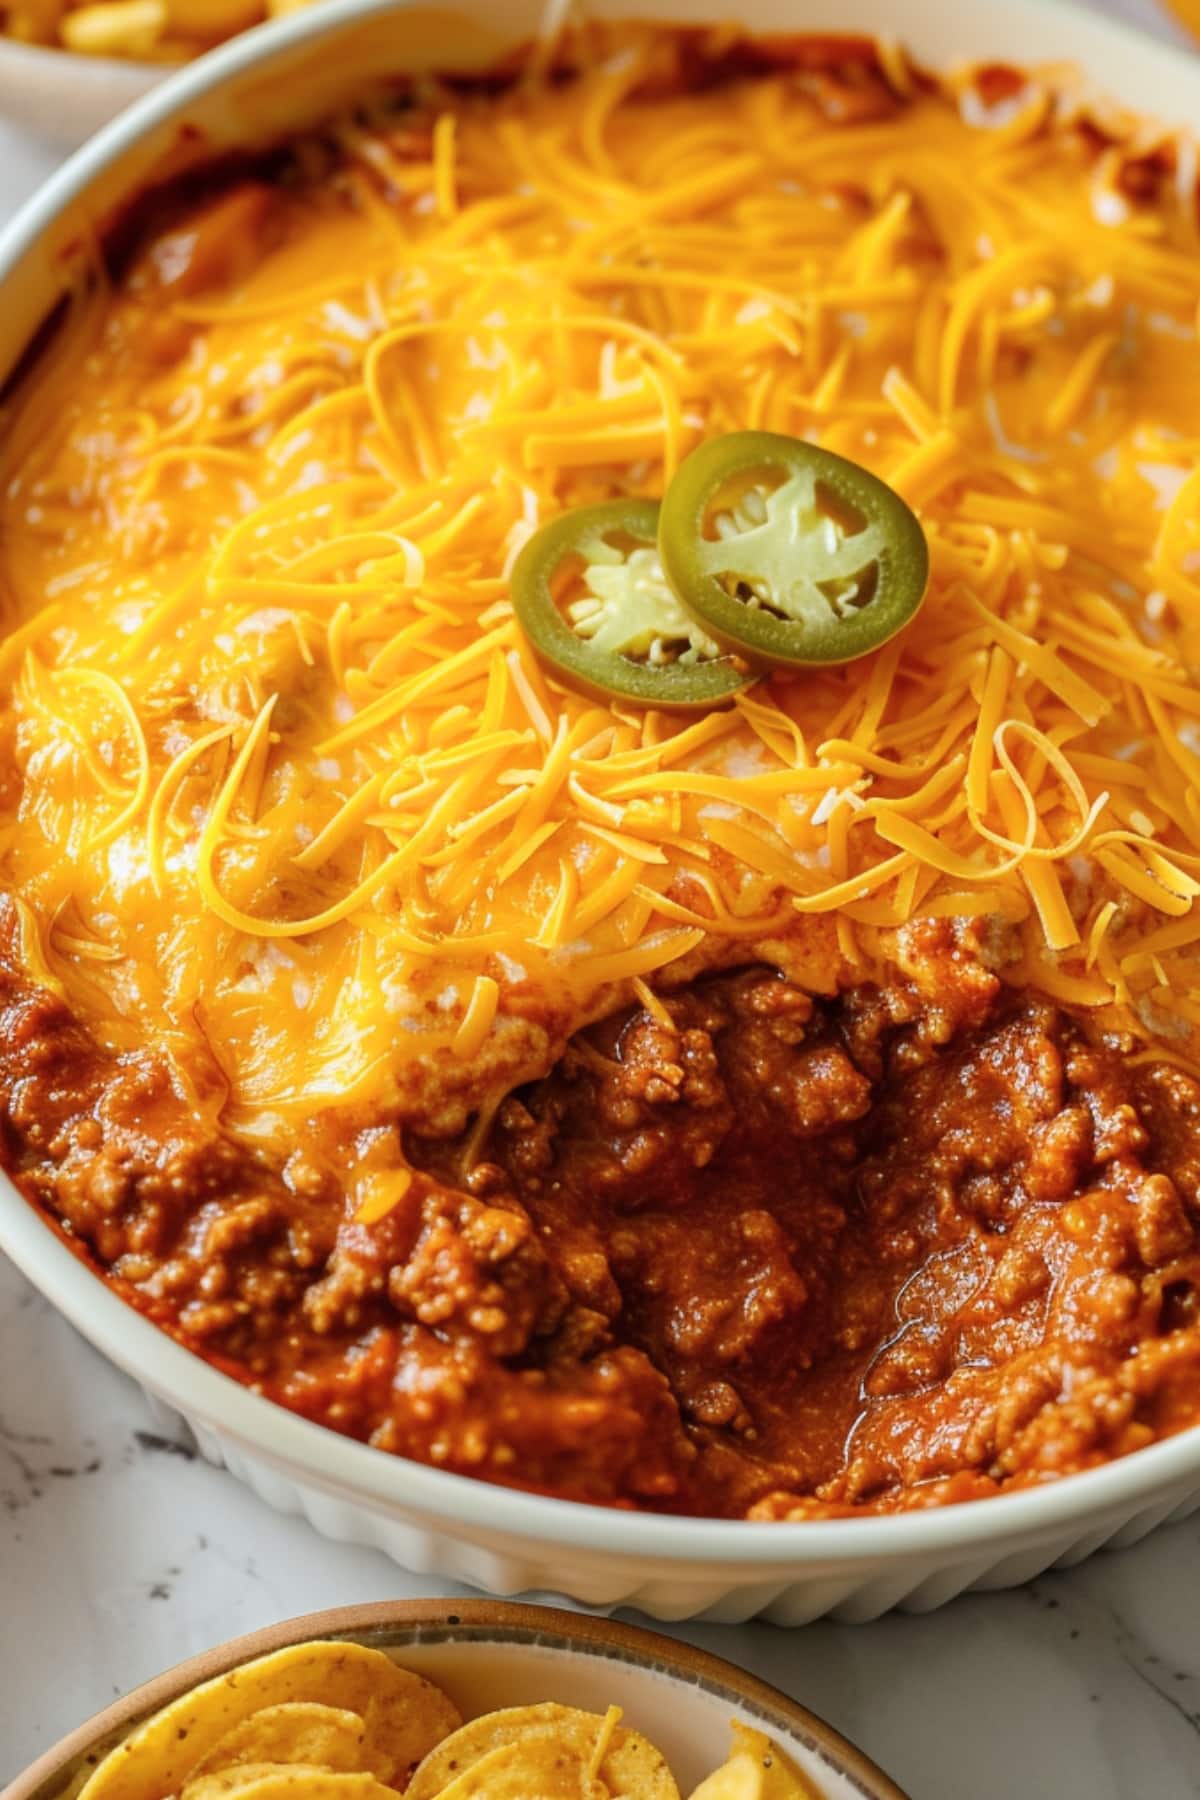 Hormel chili dip topped with ground beef, cheese and sliced jalapeno